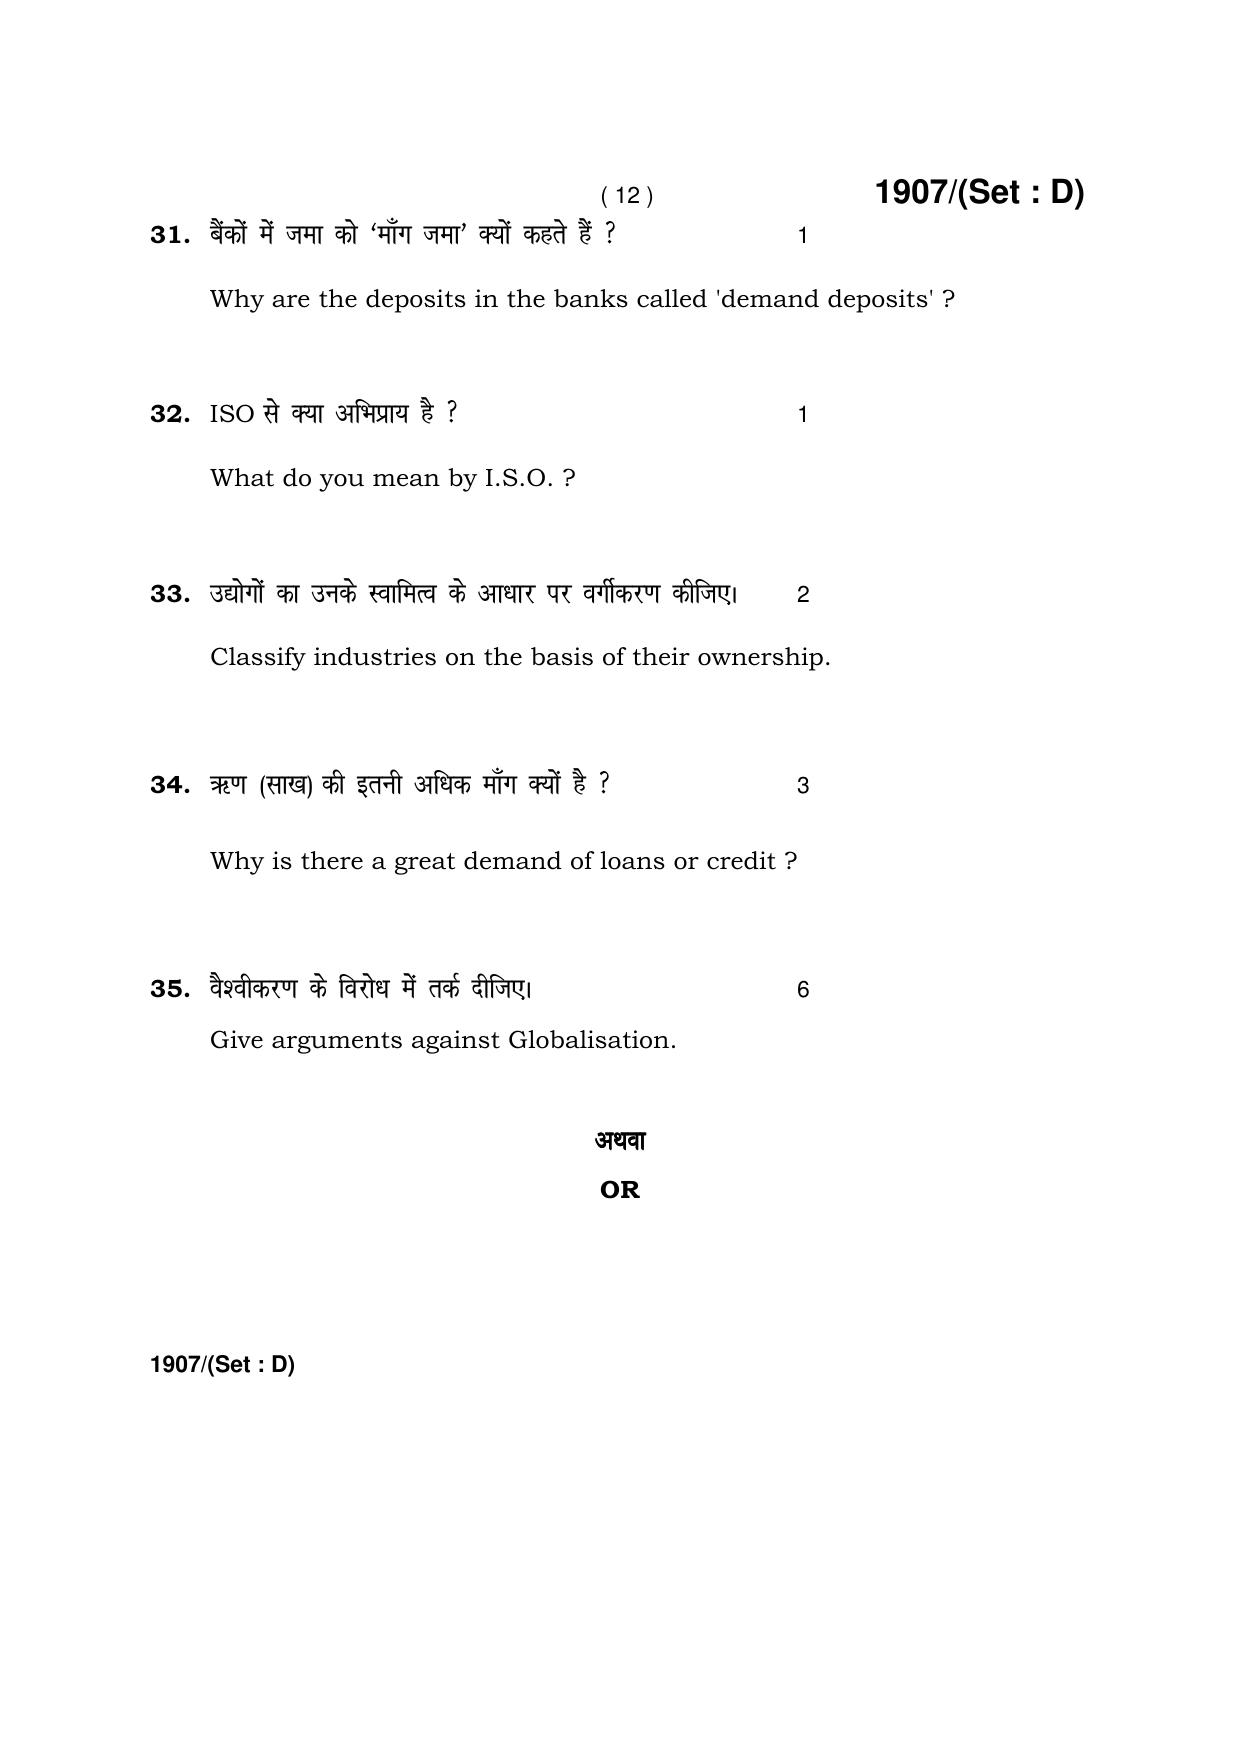 Haryana Board HBSE Class 10 Social Science -D 2017 Question Paper - Page 12